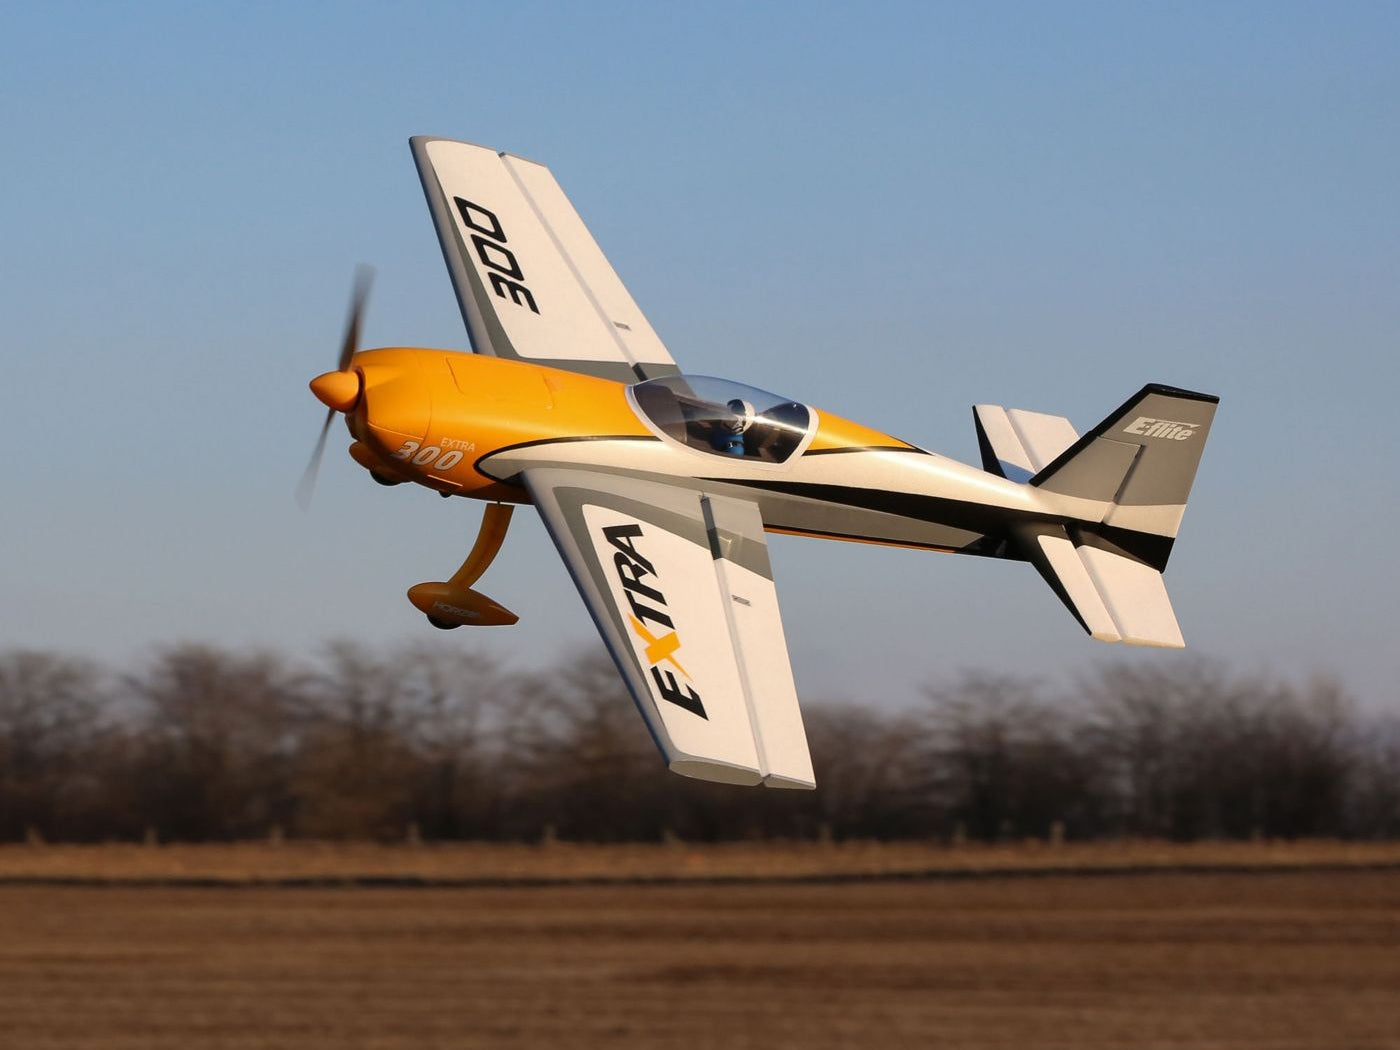 E-Flite Extra 300 1.3m BNF Basic with AS3X and SAFE Select EFL115500